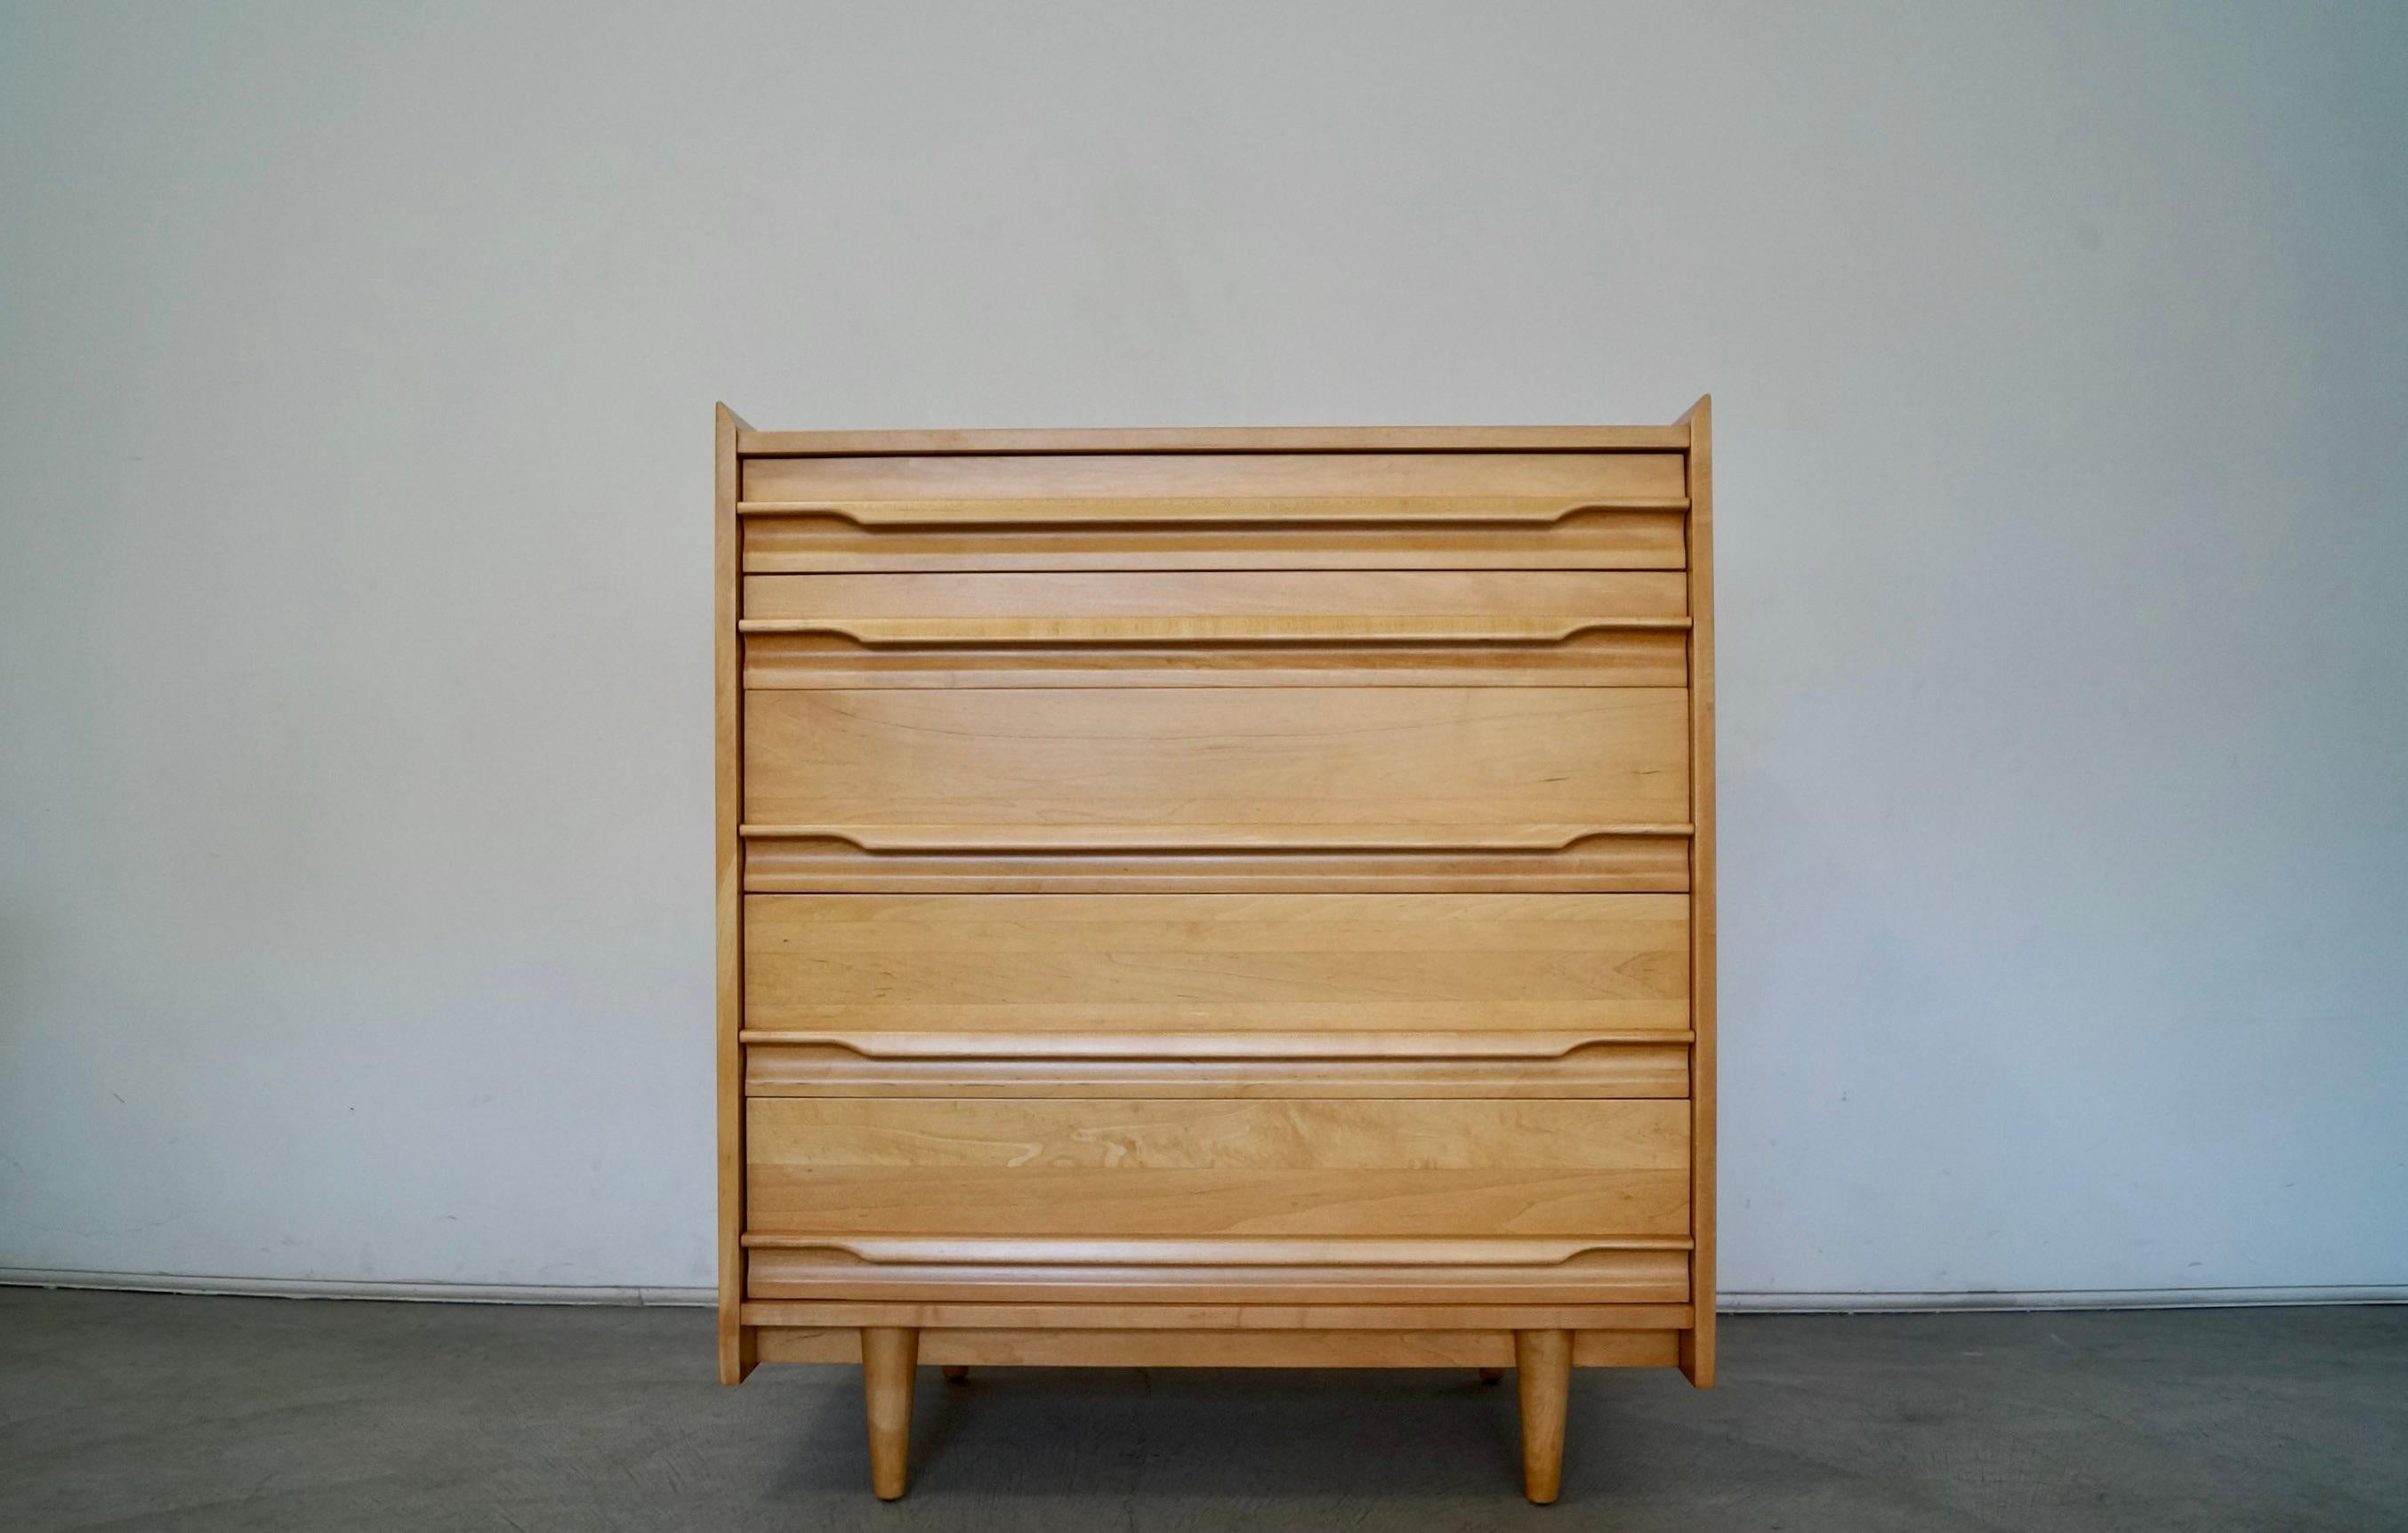 Vintage 1950's Midcentury Modern dresser for sale. Manufactured by Crawford Furniture, and made of solid maple. It has been professionally refinished, and looks immaculate. It has five drawers that are dovetailed on both ends, and is a really